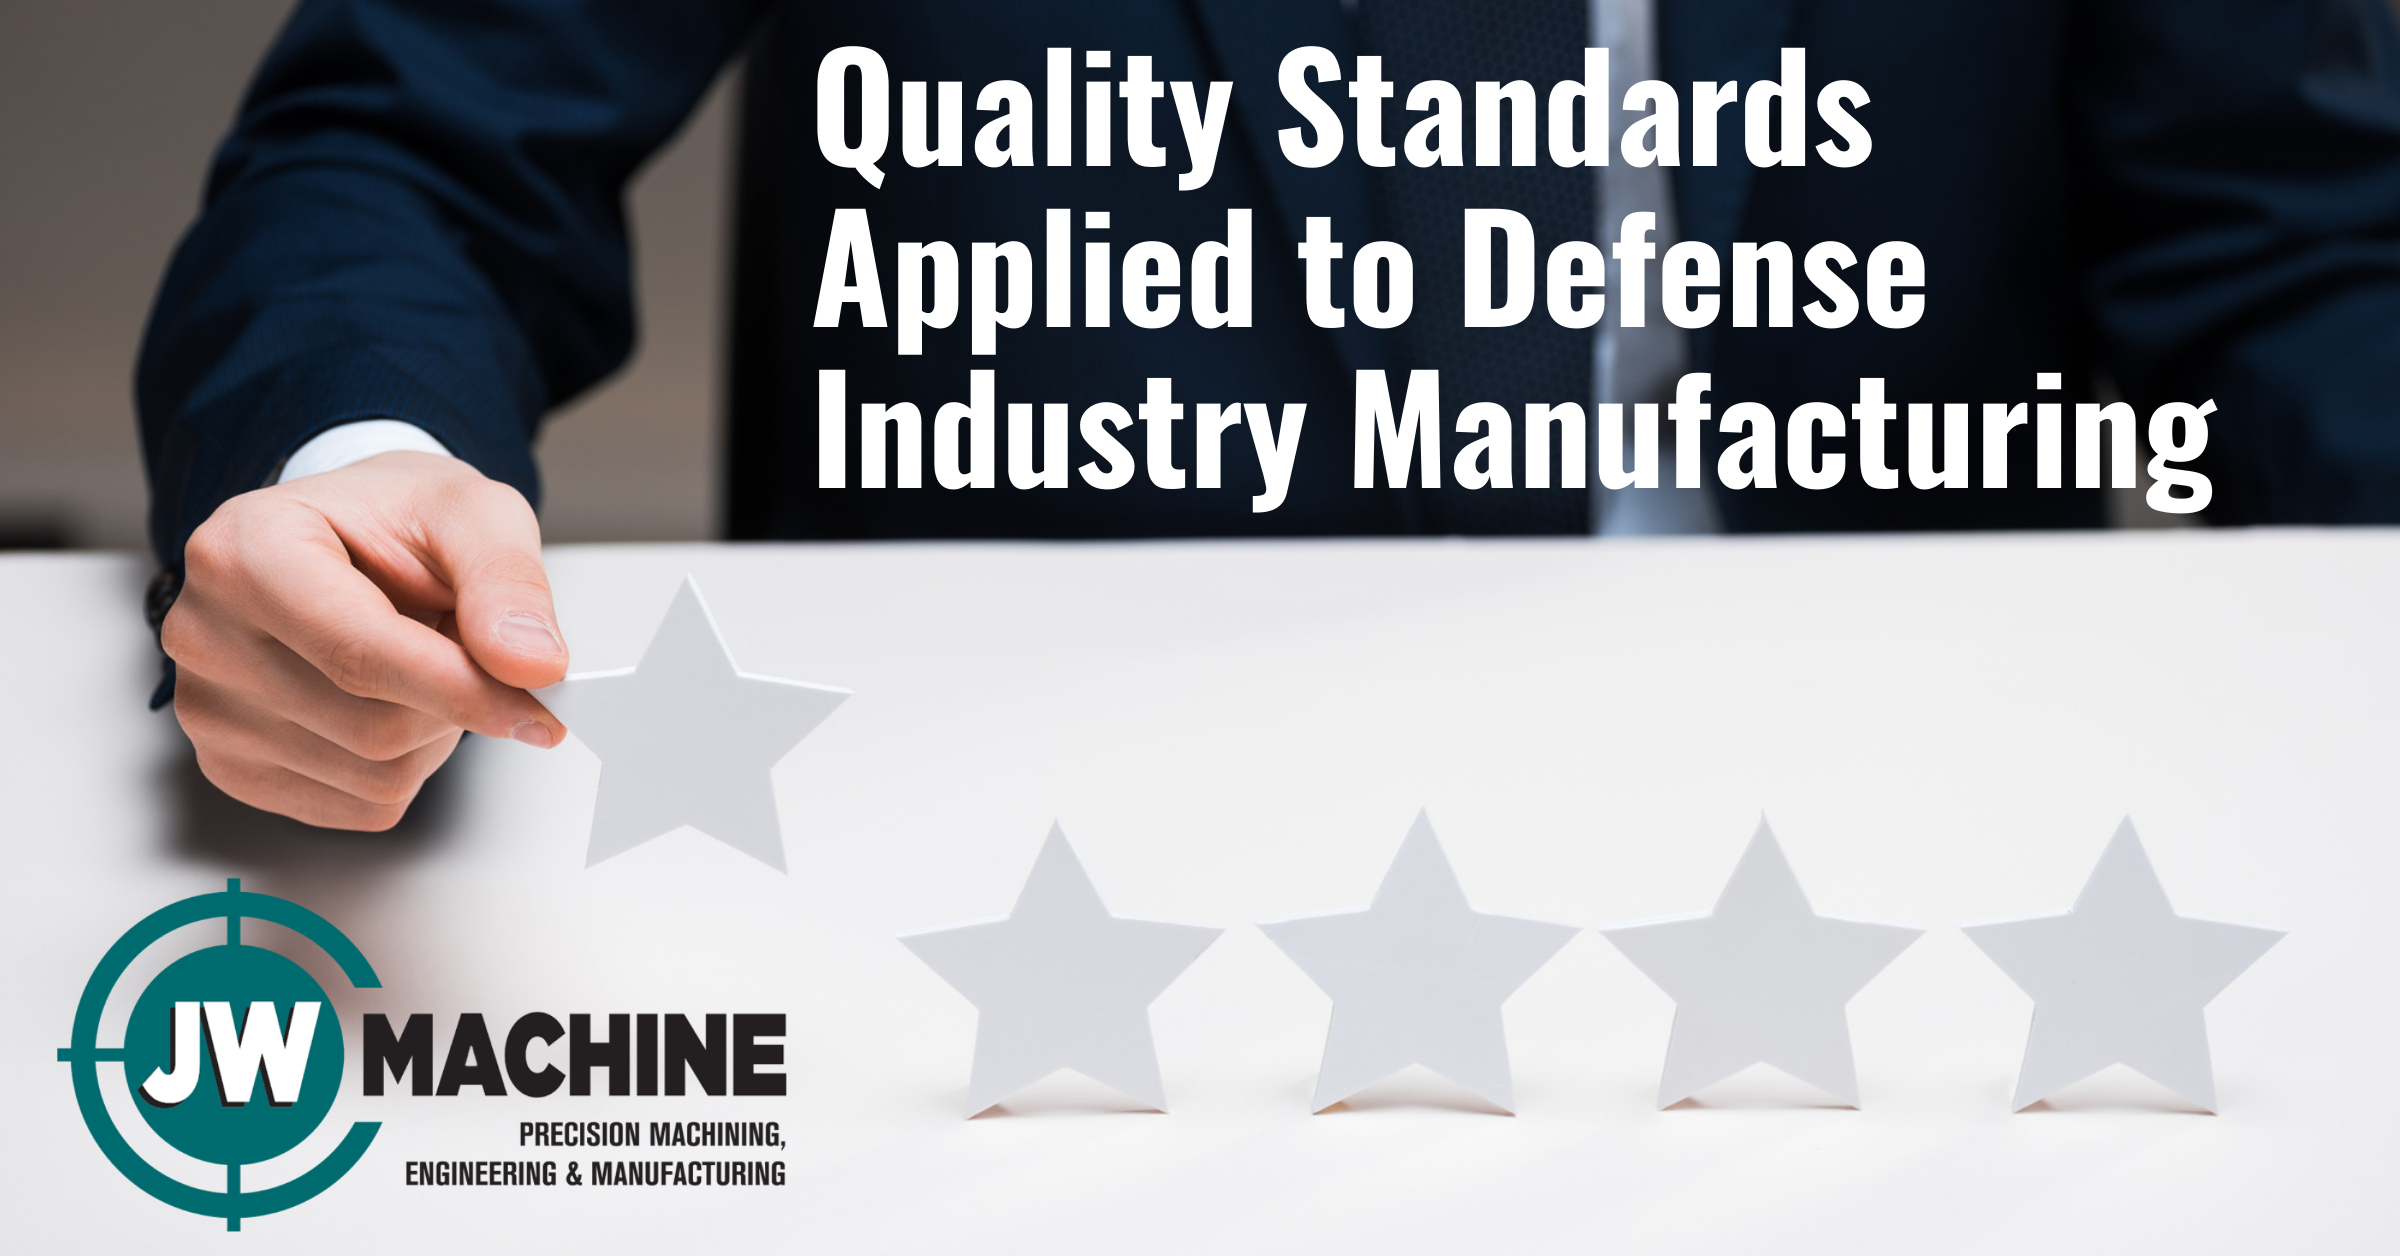 Quality Standards Applied to Defense Industry Manufacturing